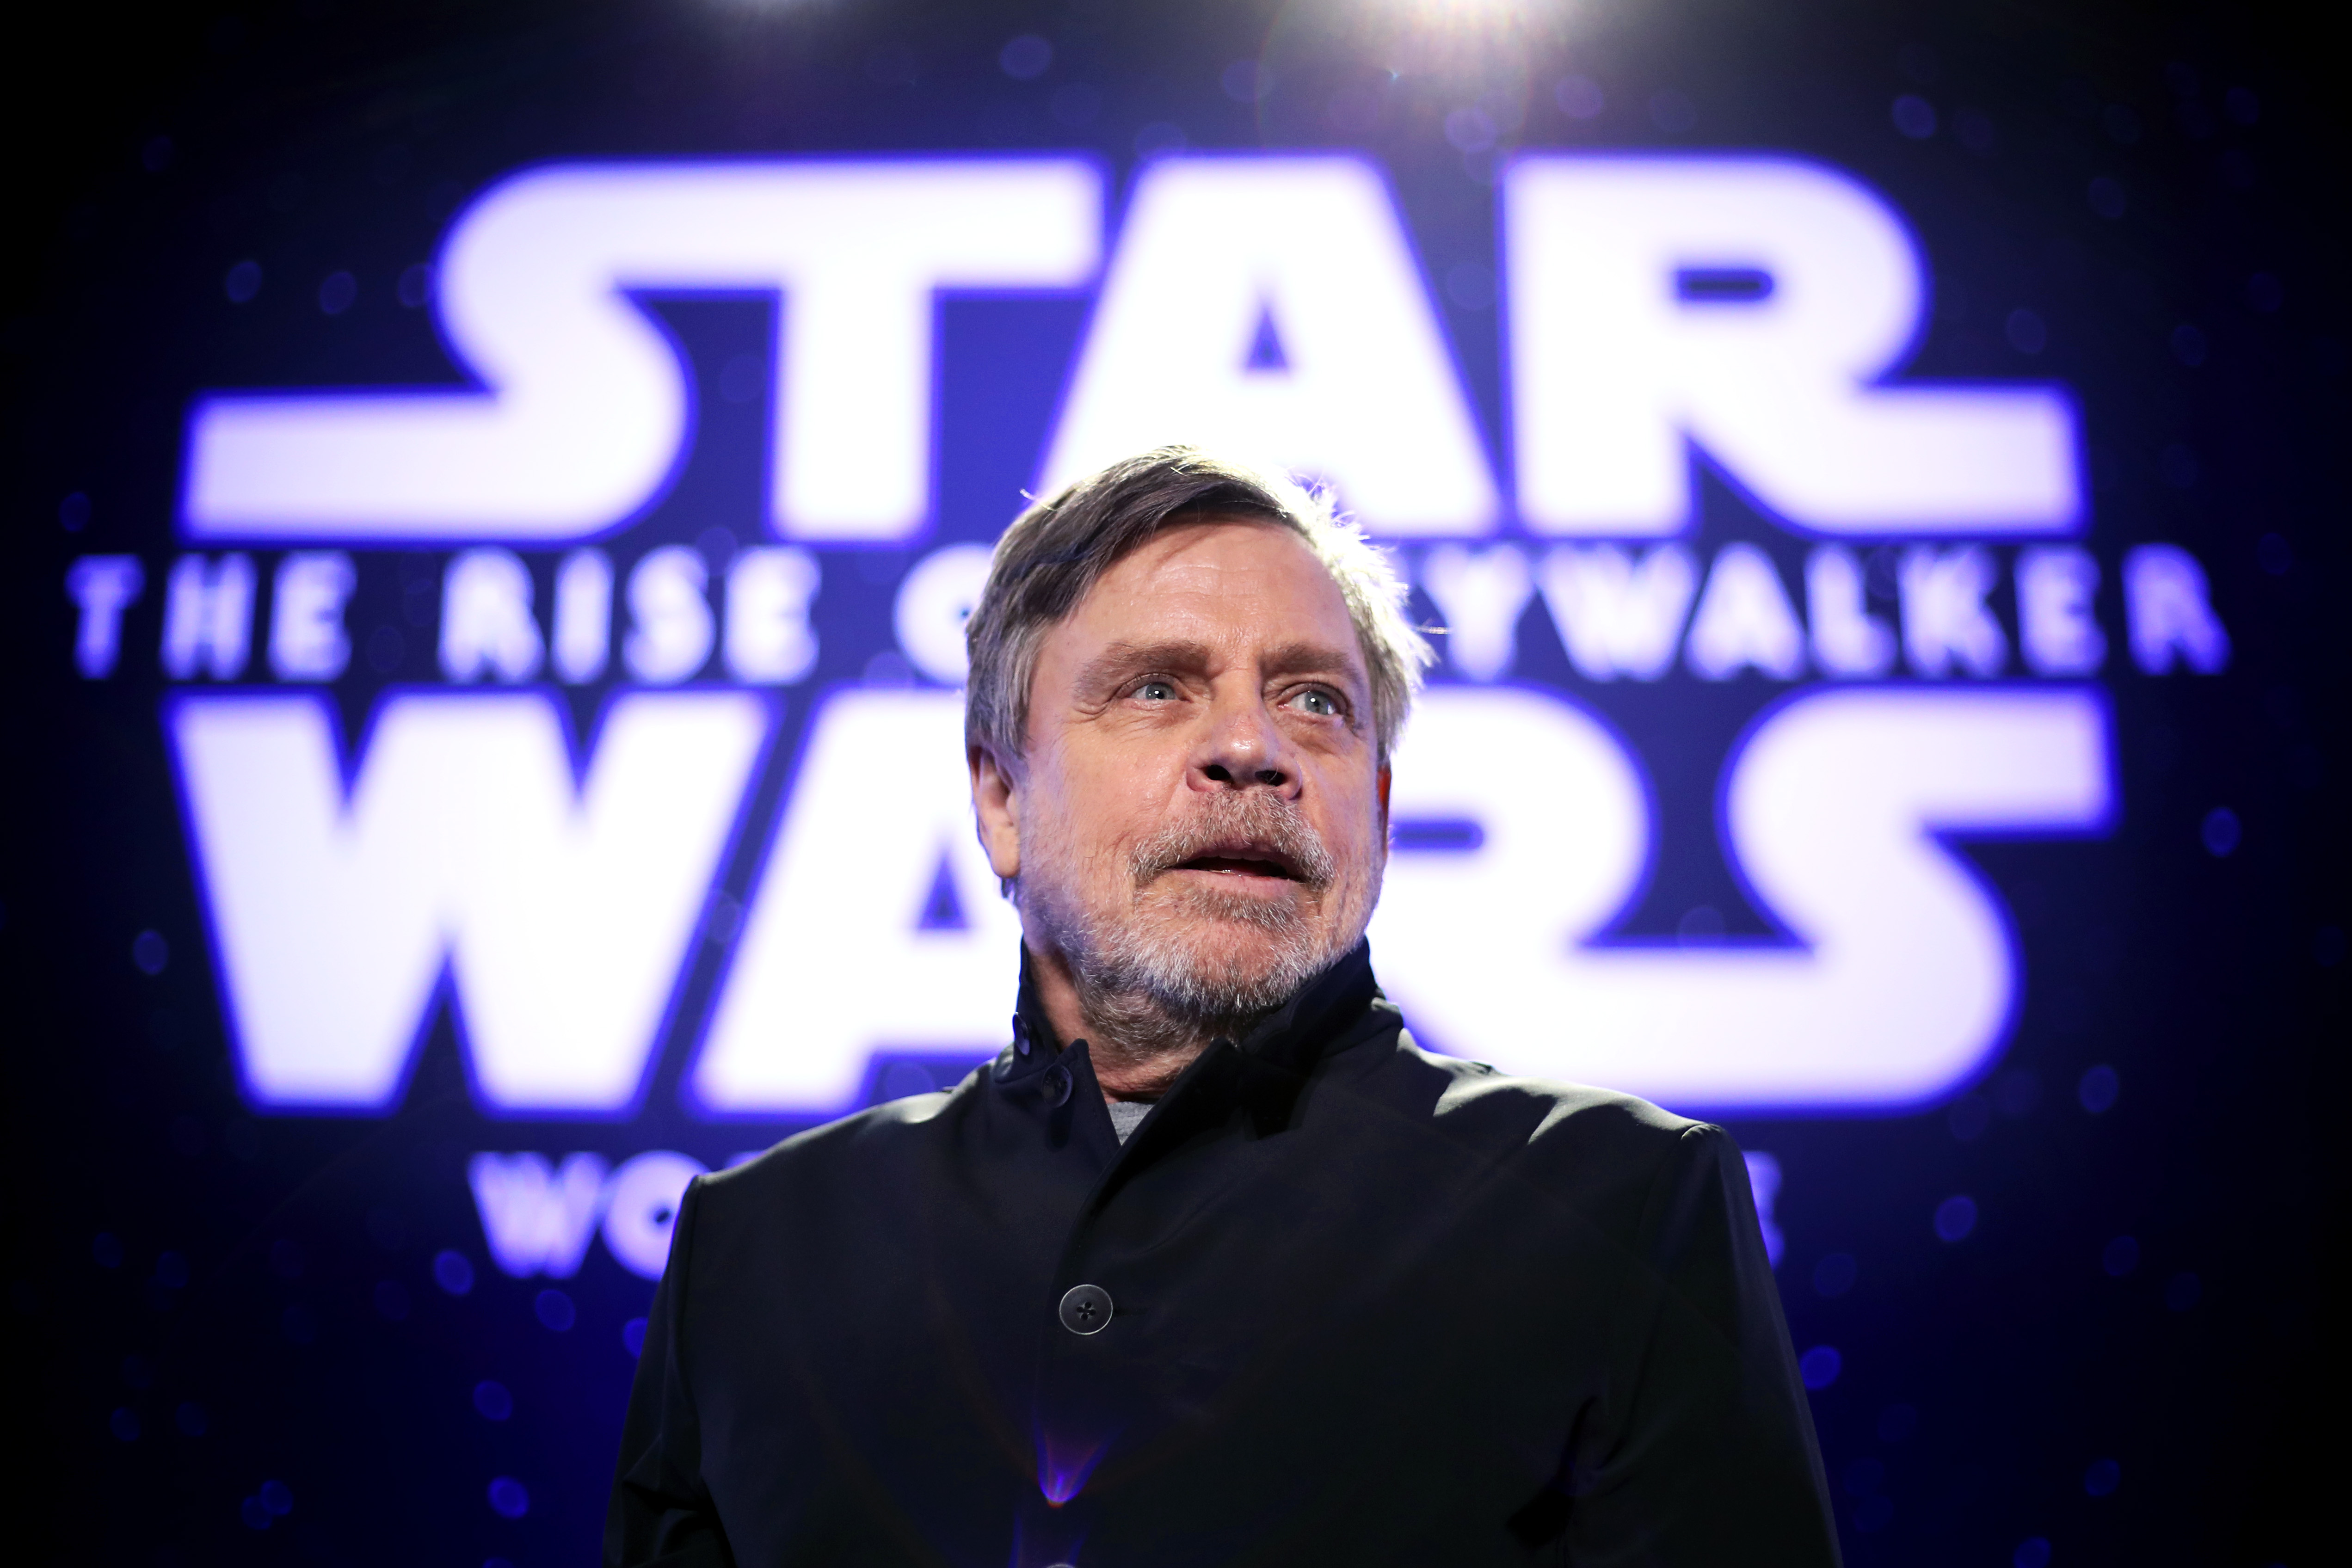 Inside the Rise of Skywalker Premiere: “Well, This Is Terrifying